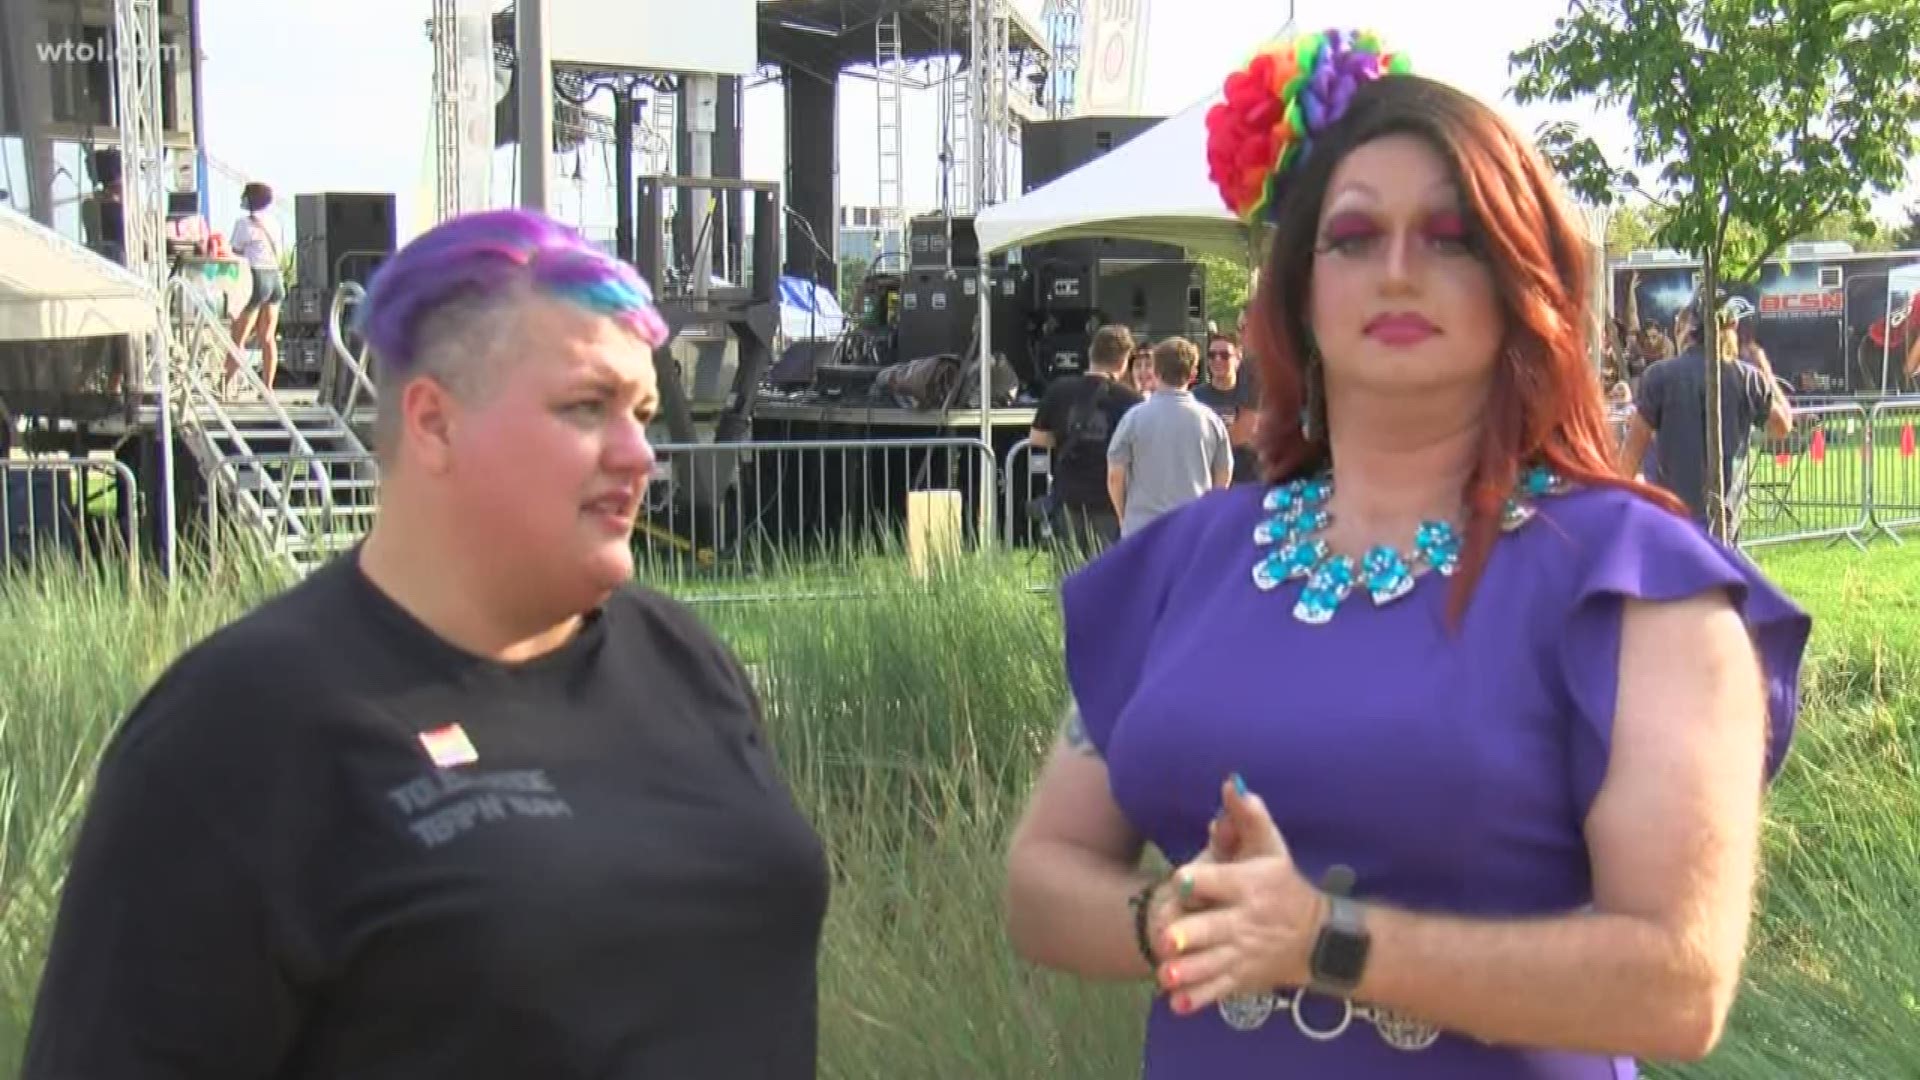 You will be able to see the Toledo Pride Interpreting Team at the main stage Saturday with most of the drag performances.